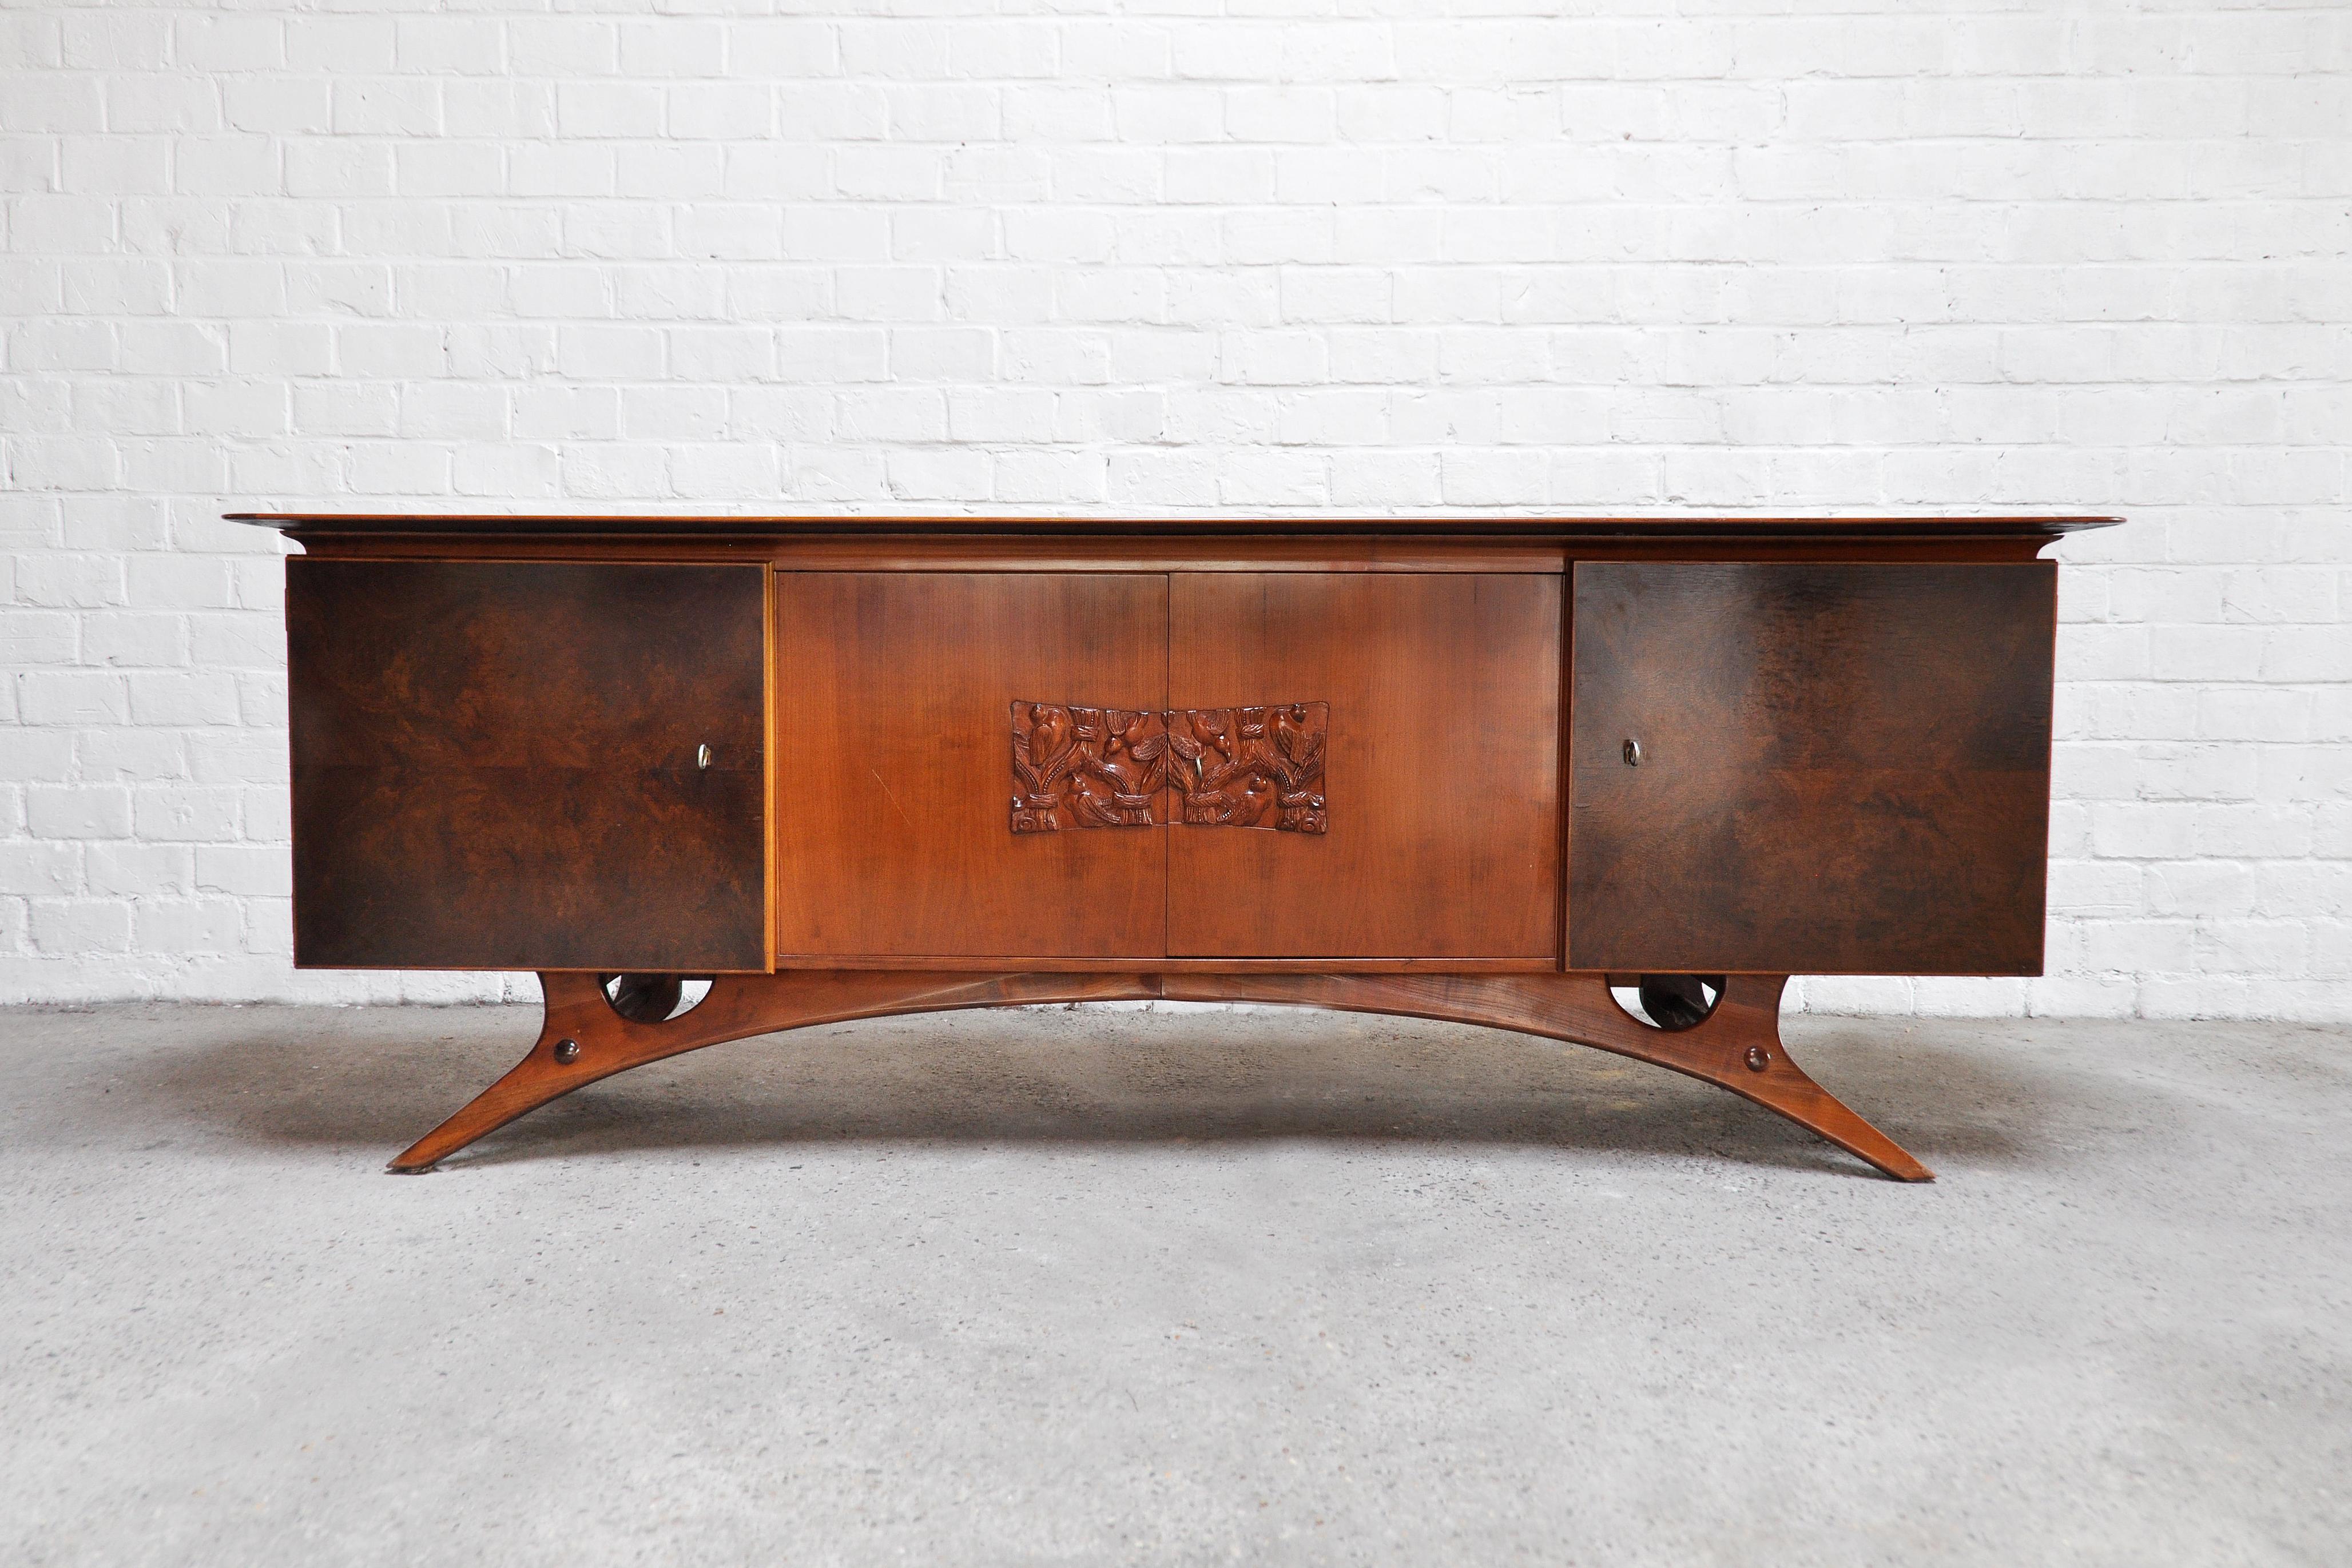 A fabulous Italian sideboard with a unique sculptural base and a modernist bas-relief carving depicting songbirds. Constructed out of mixed woods such as teak, veneer and walnut. Features four dours including the original keys. The designer is